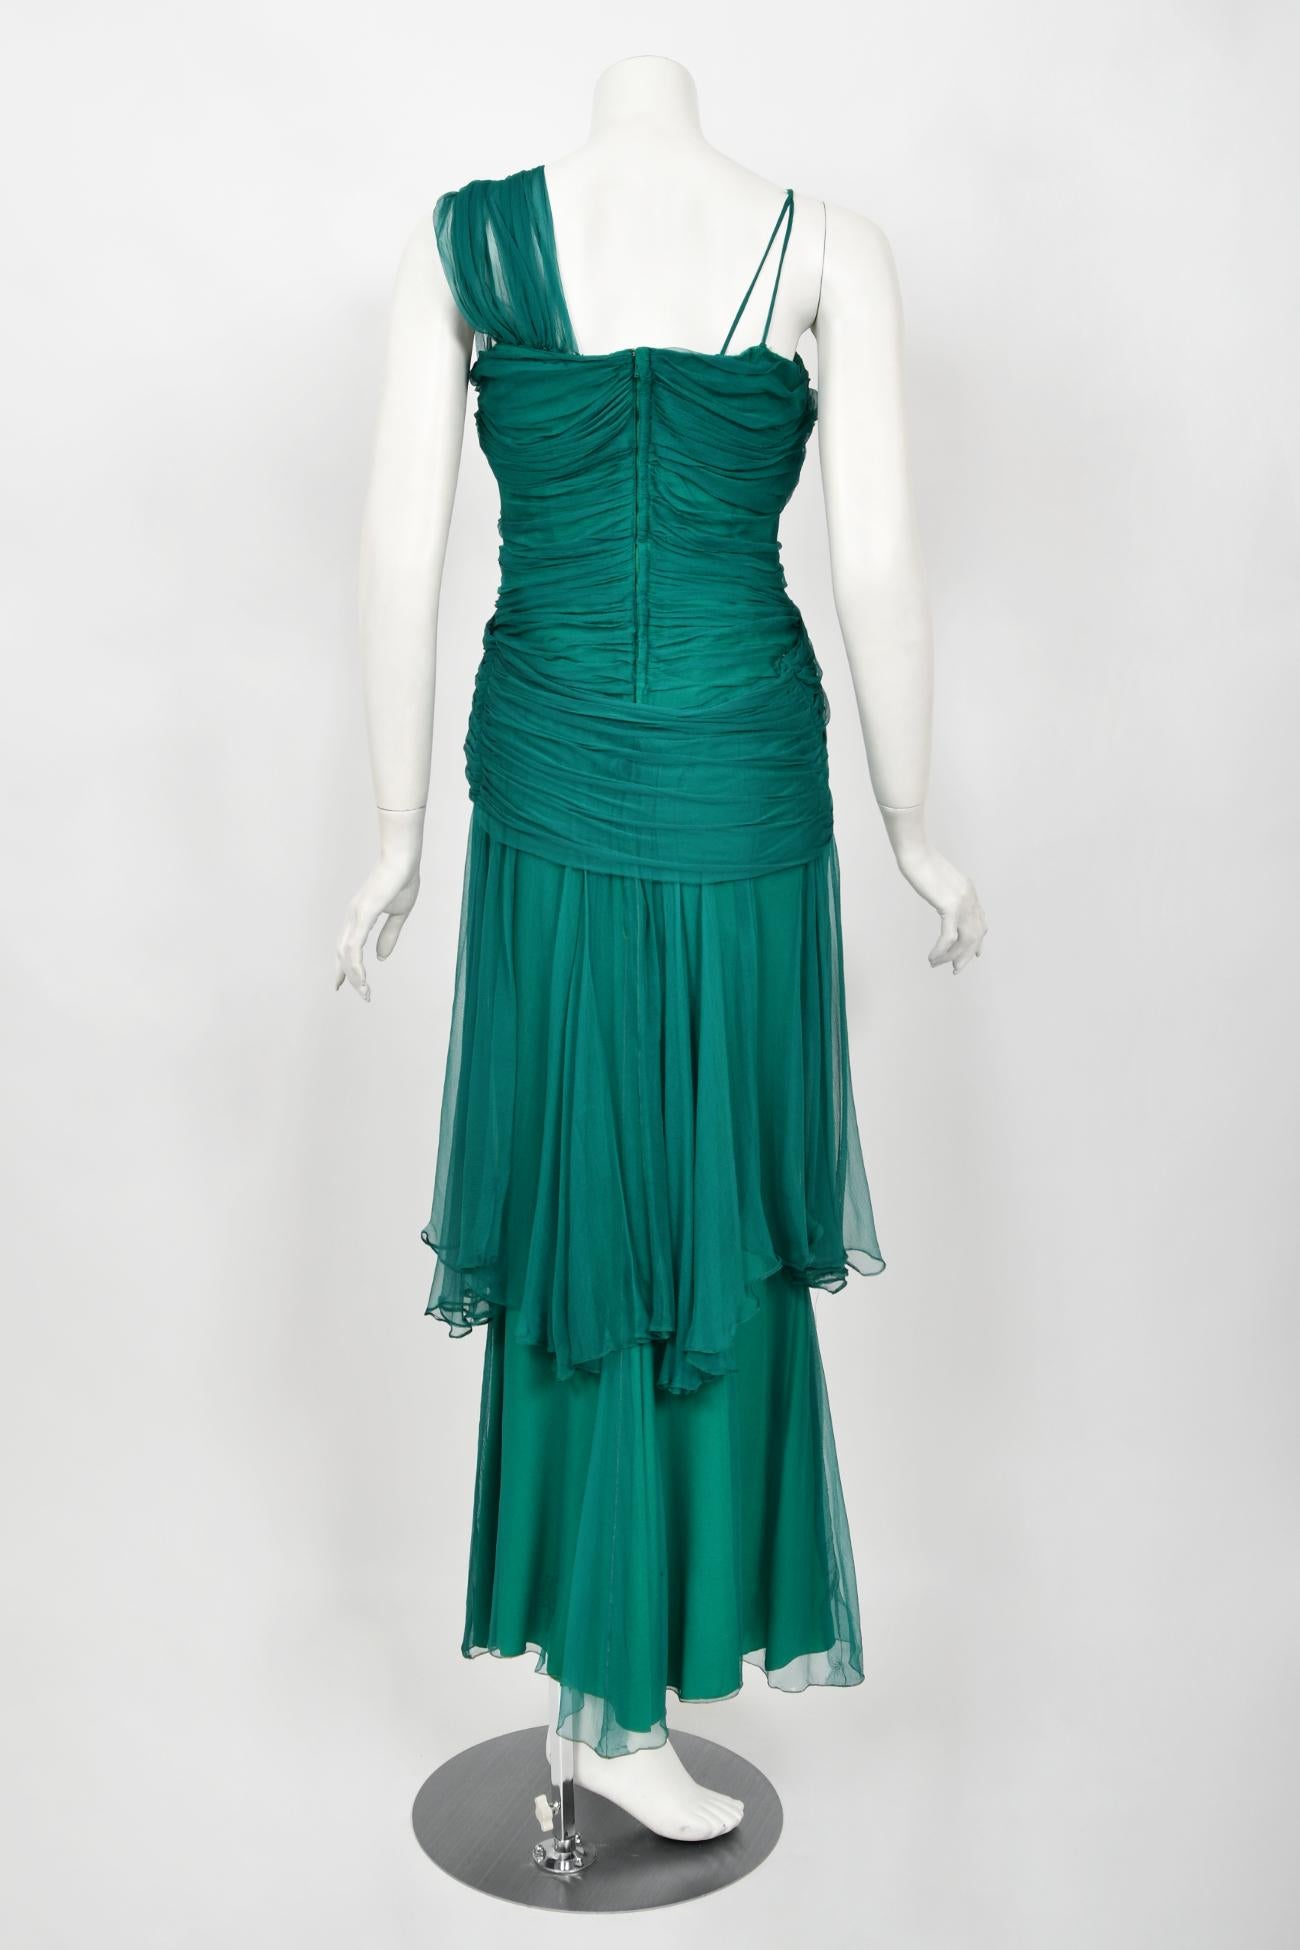 Vintage 1950's Irene Lentz Couture Teal Green Draped Silk Grecian Goddess Gown For Sale 9